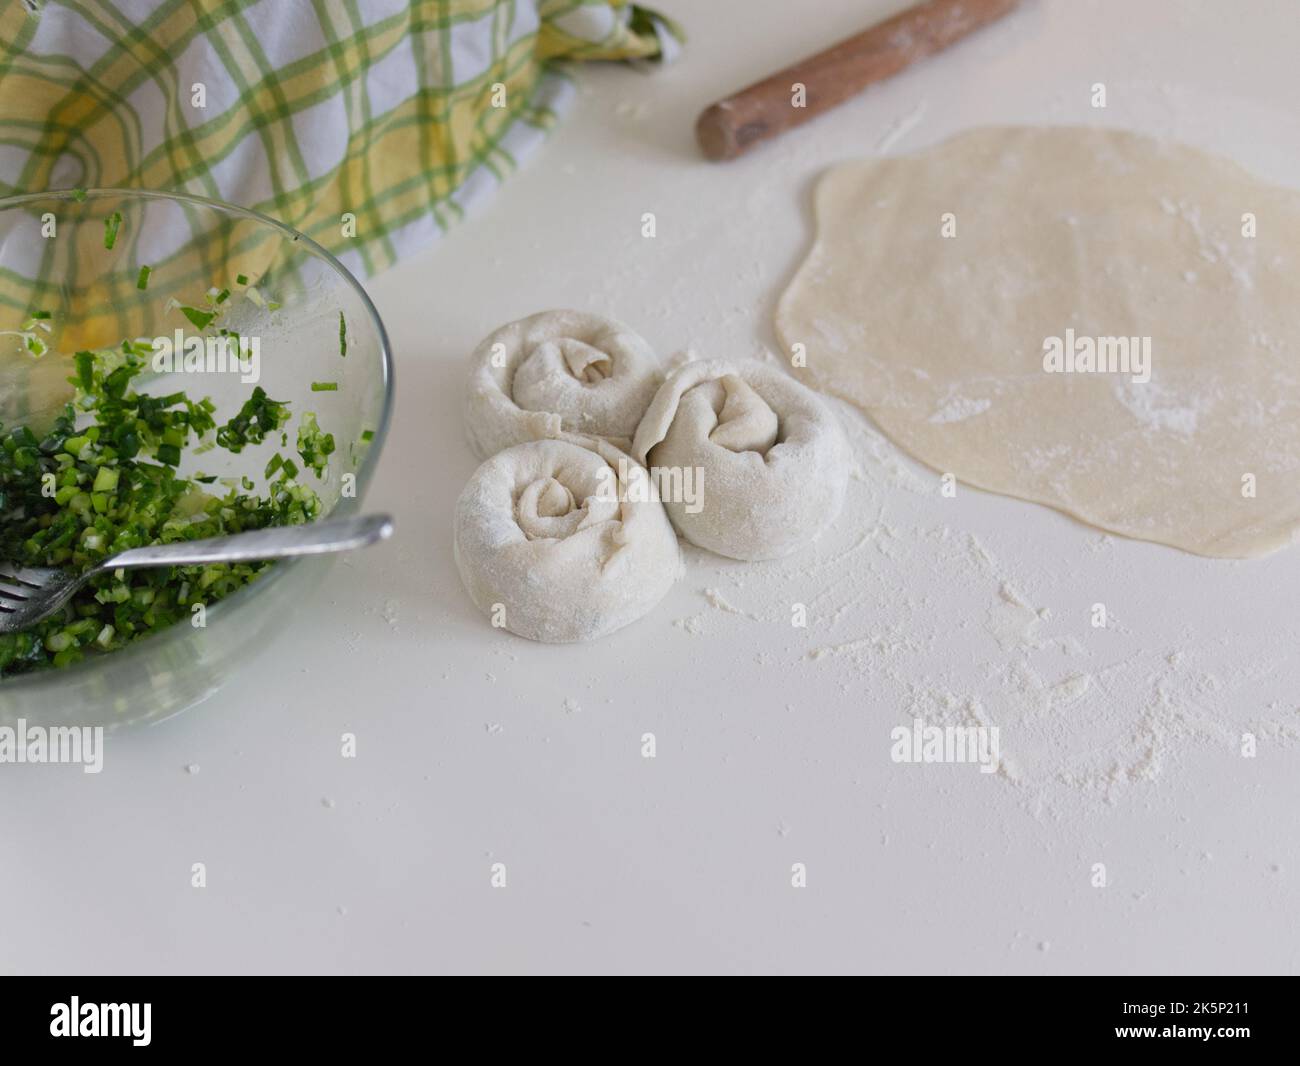 Chinese food in making. Scallion pancake, a traditional pastry people make at home. Stock Photo